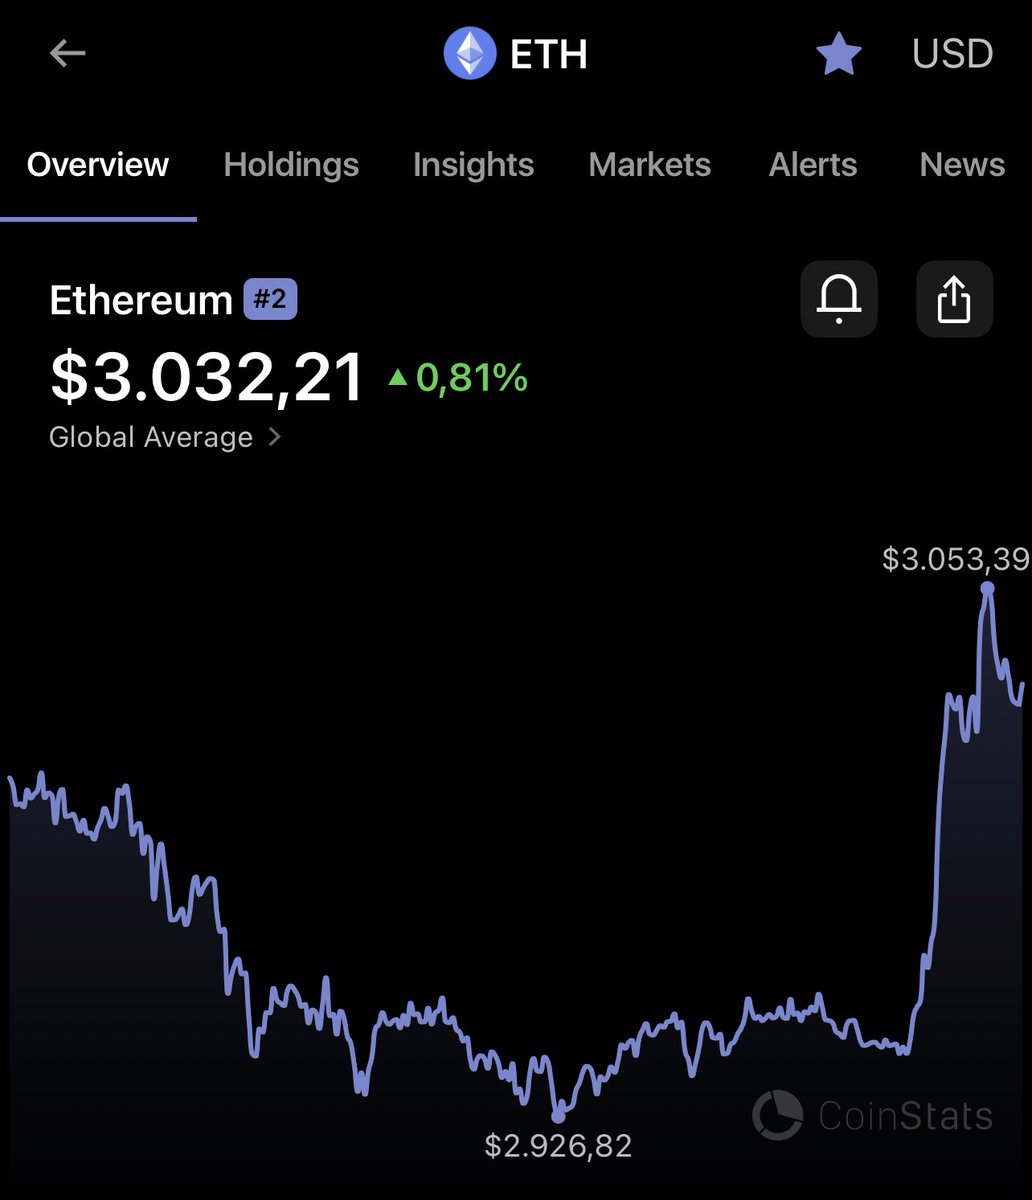 Now that ETH is over $3k and the market has turned bullish, it might never drop below 3k again gm bulls